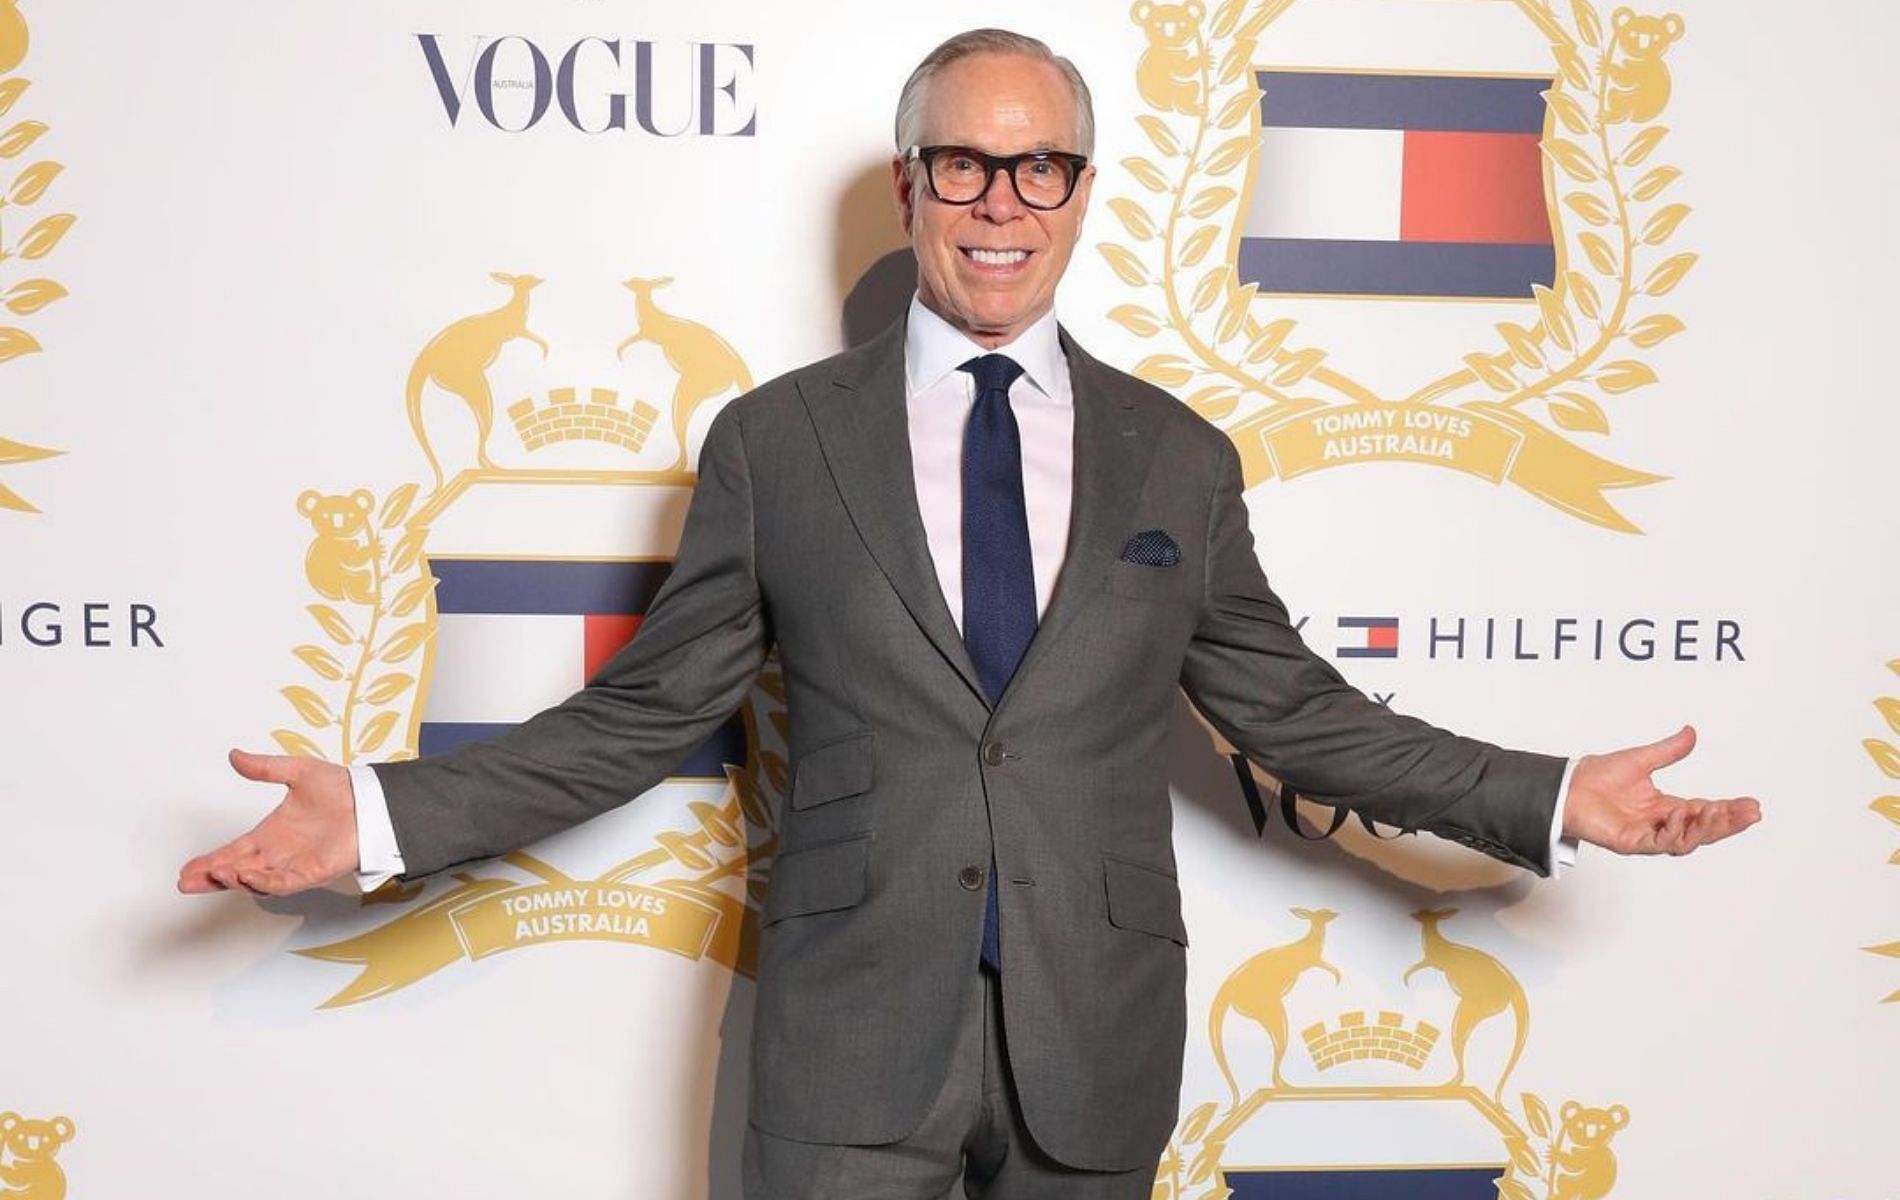 Tommy Hilfiger is the guest judge on the Project Runway finale (Image via thomasjhilfiger/ Instagram)